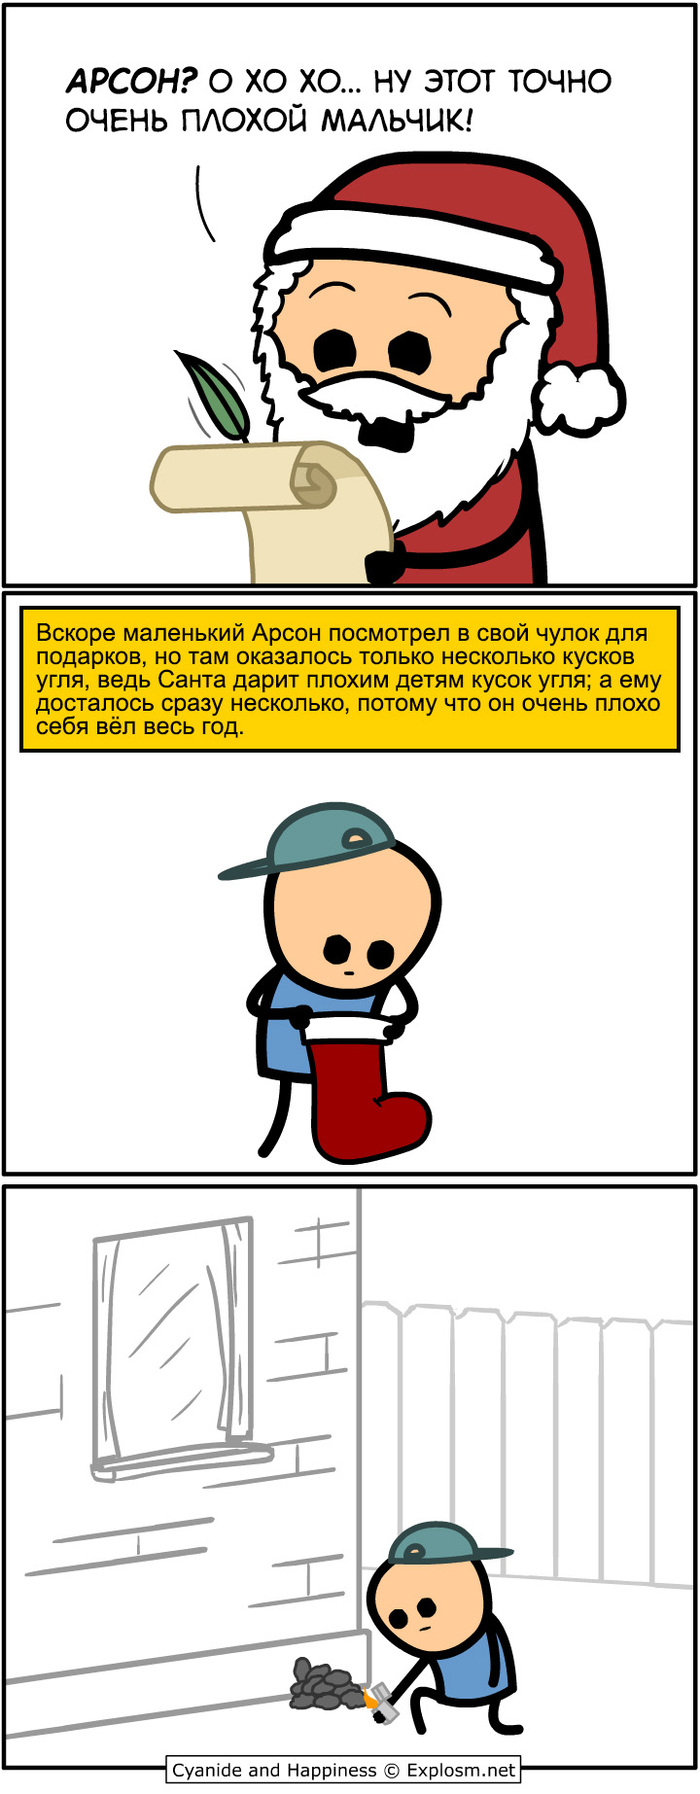    , Cyanide and Happiness, , , , , Imgur ()